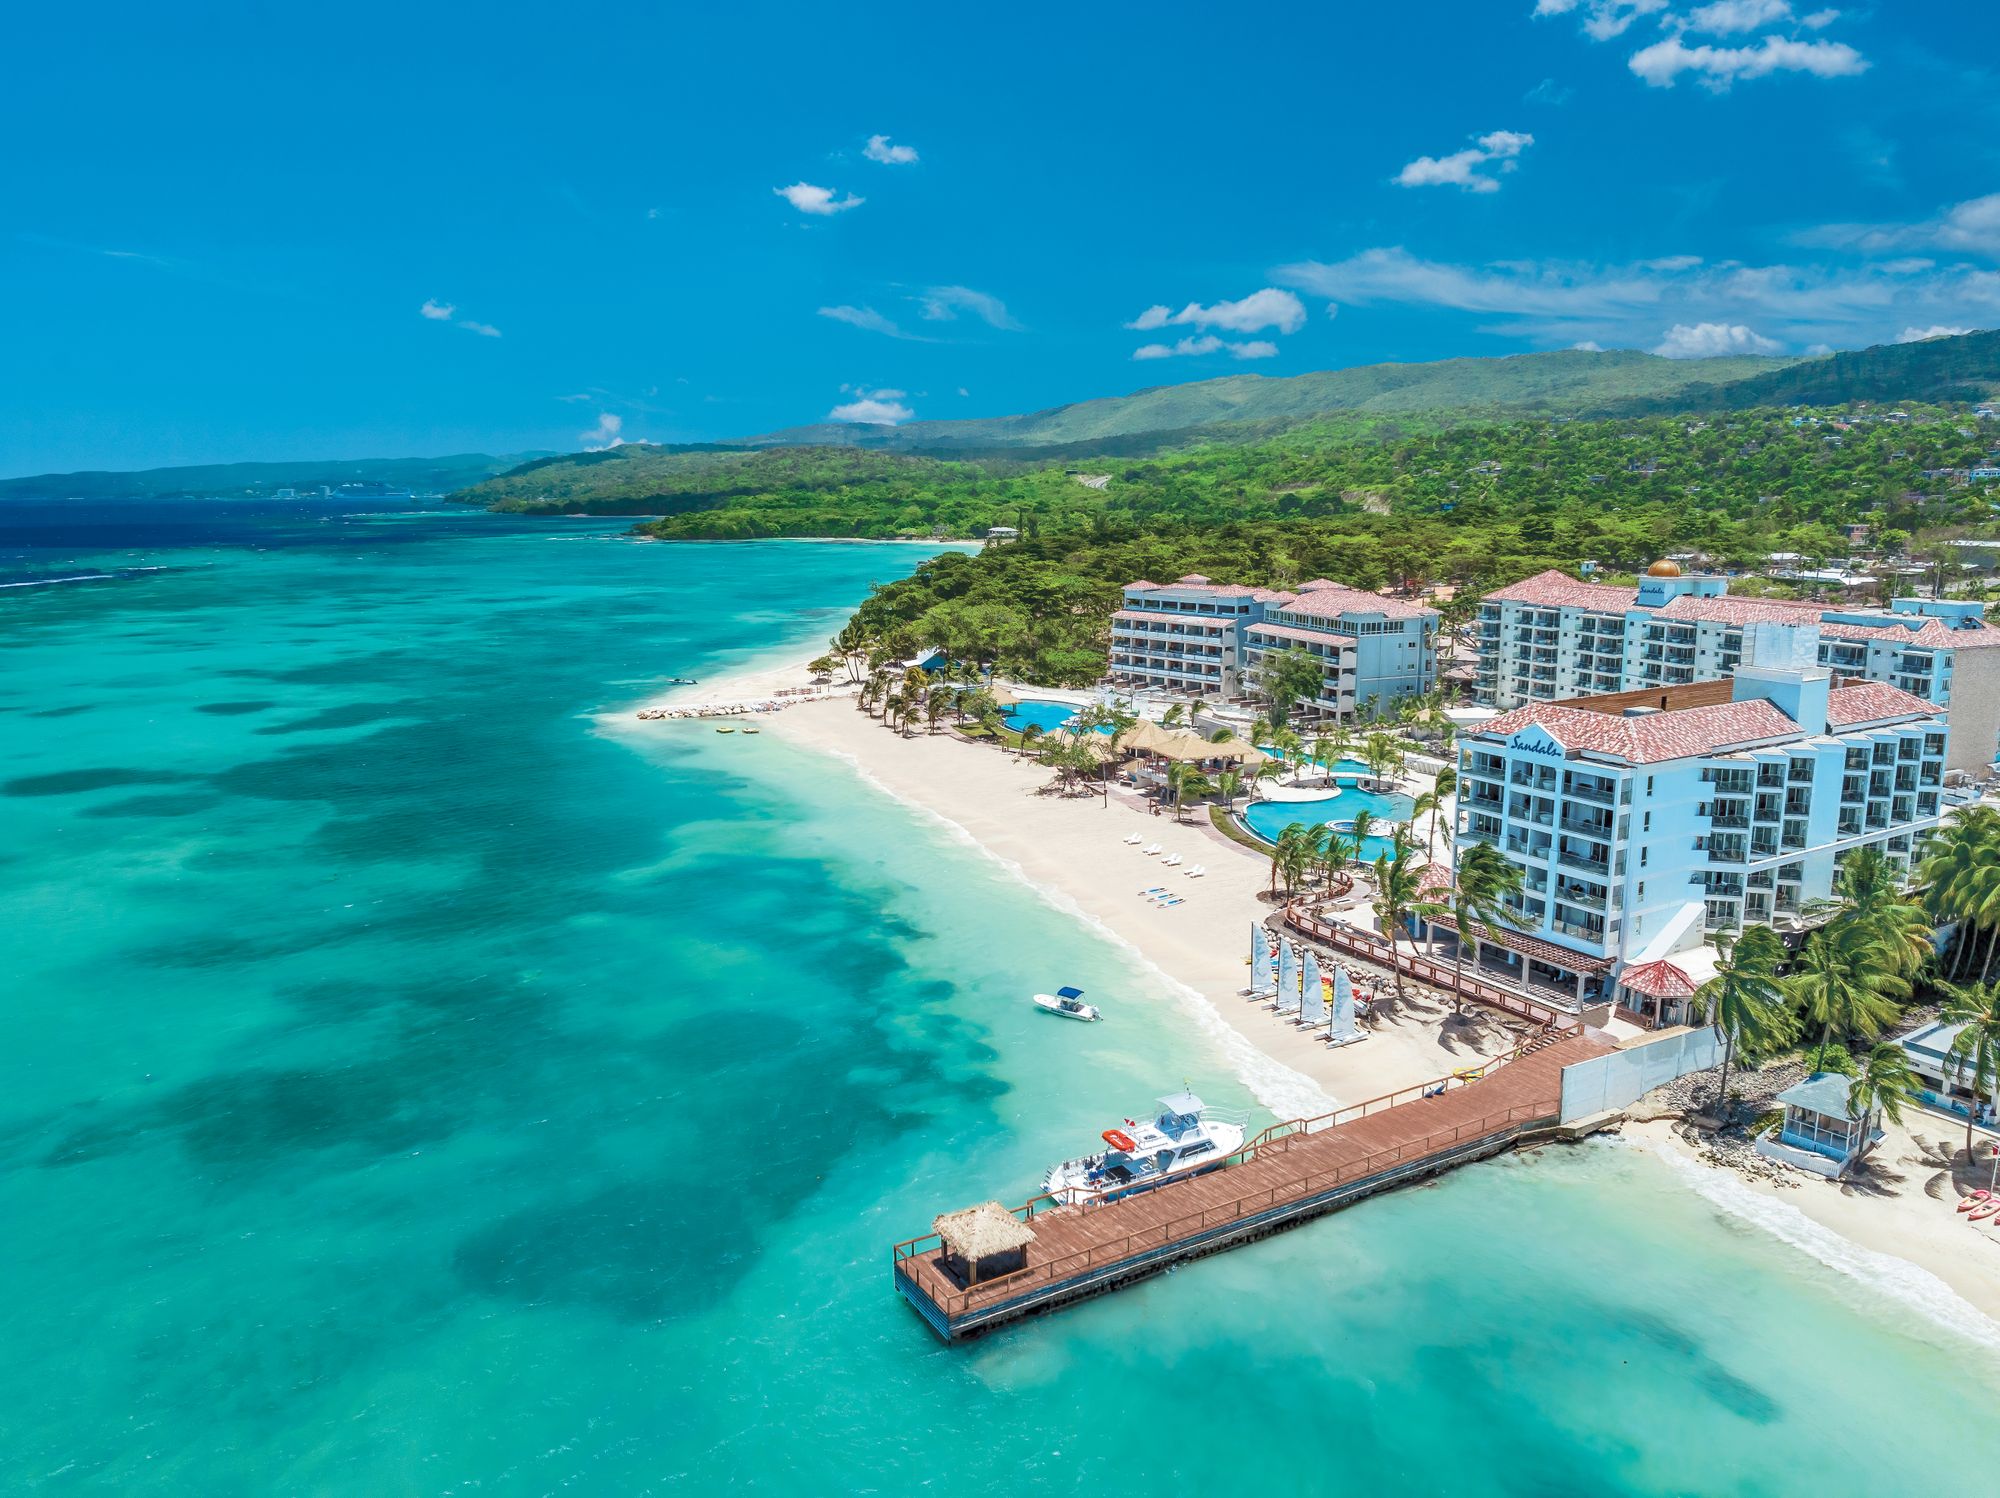 1.-Aerial-view-of-the-all-new-Sandals-Dunns-River-a-260-room-luxury-included-resort-nestled-in-the-heart-of-Ocho-Rios-Jamaica.